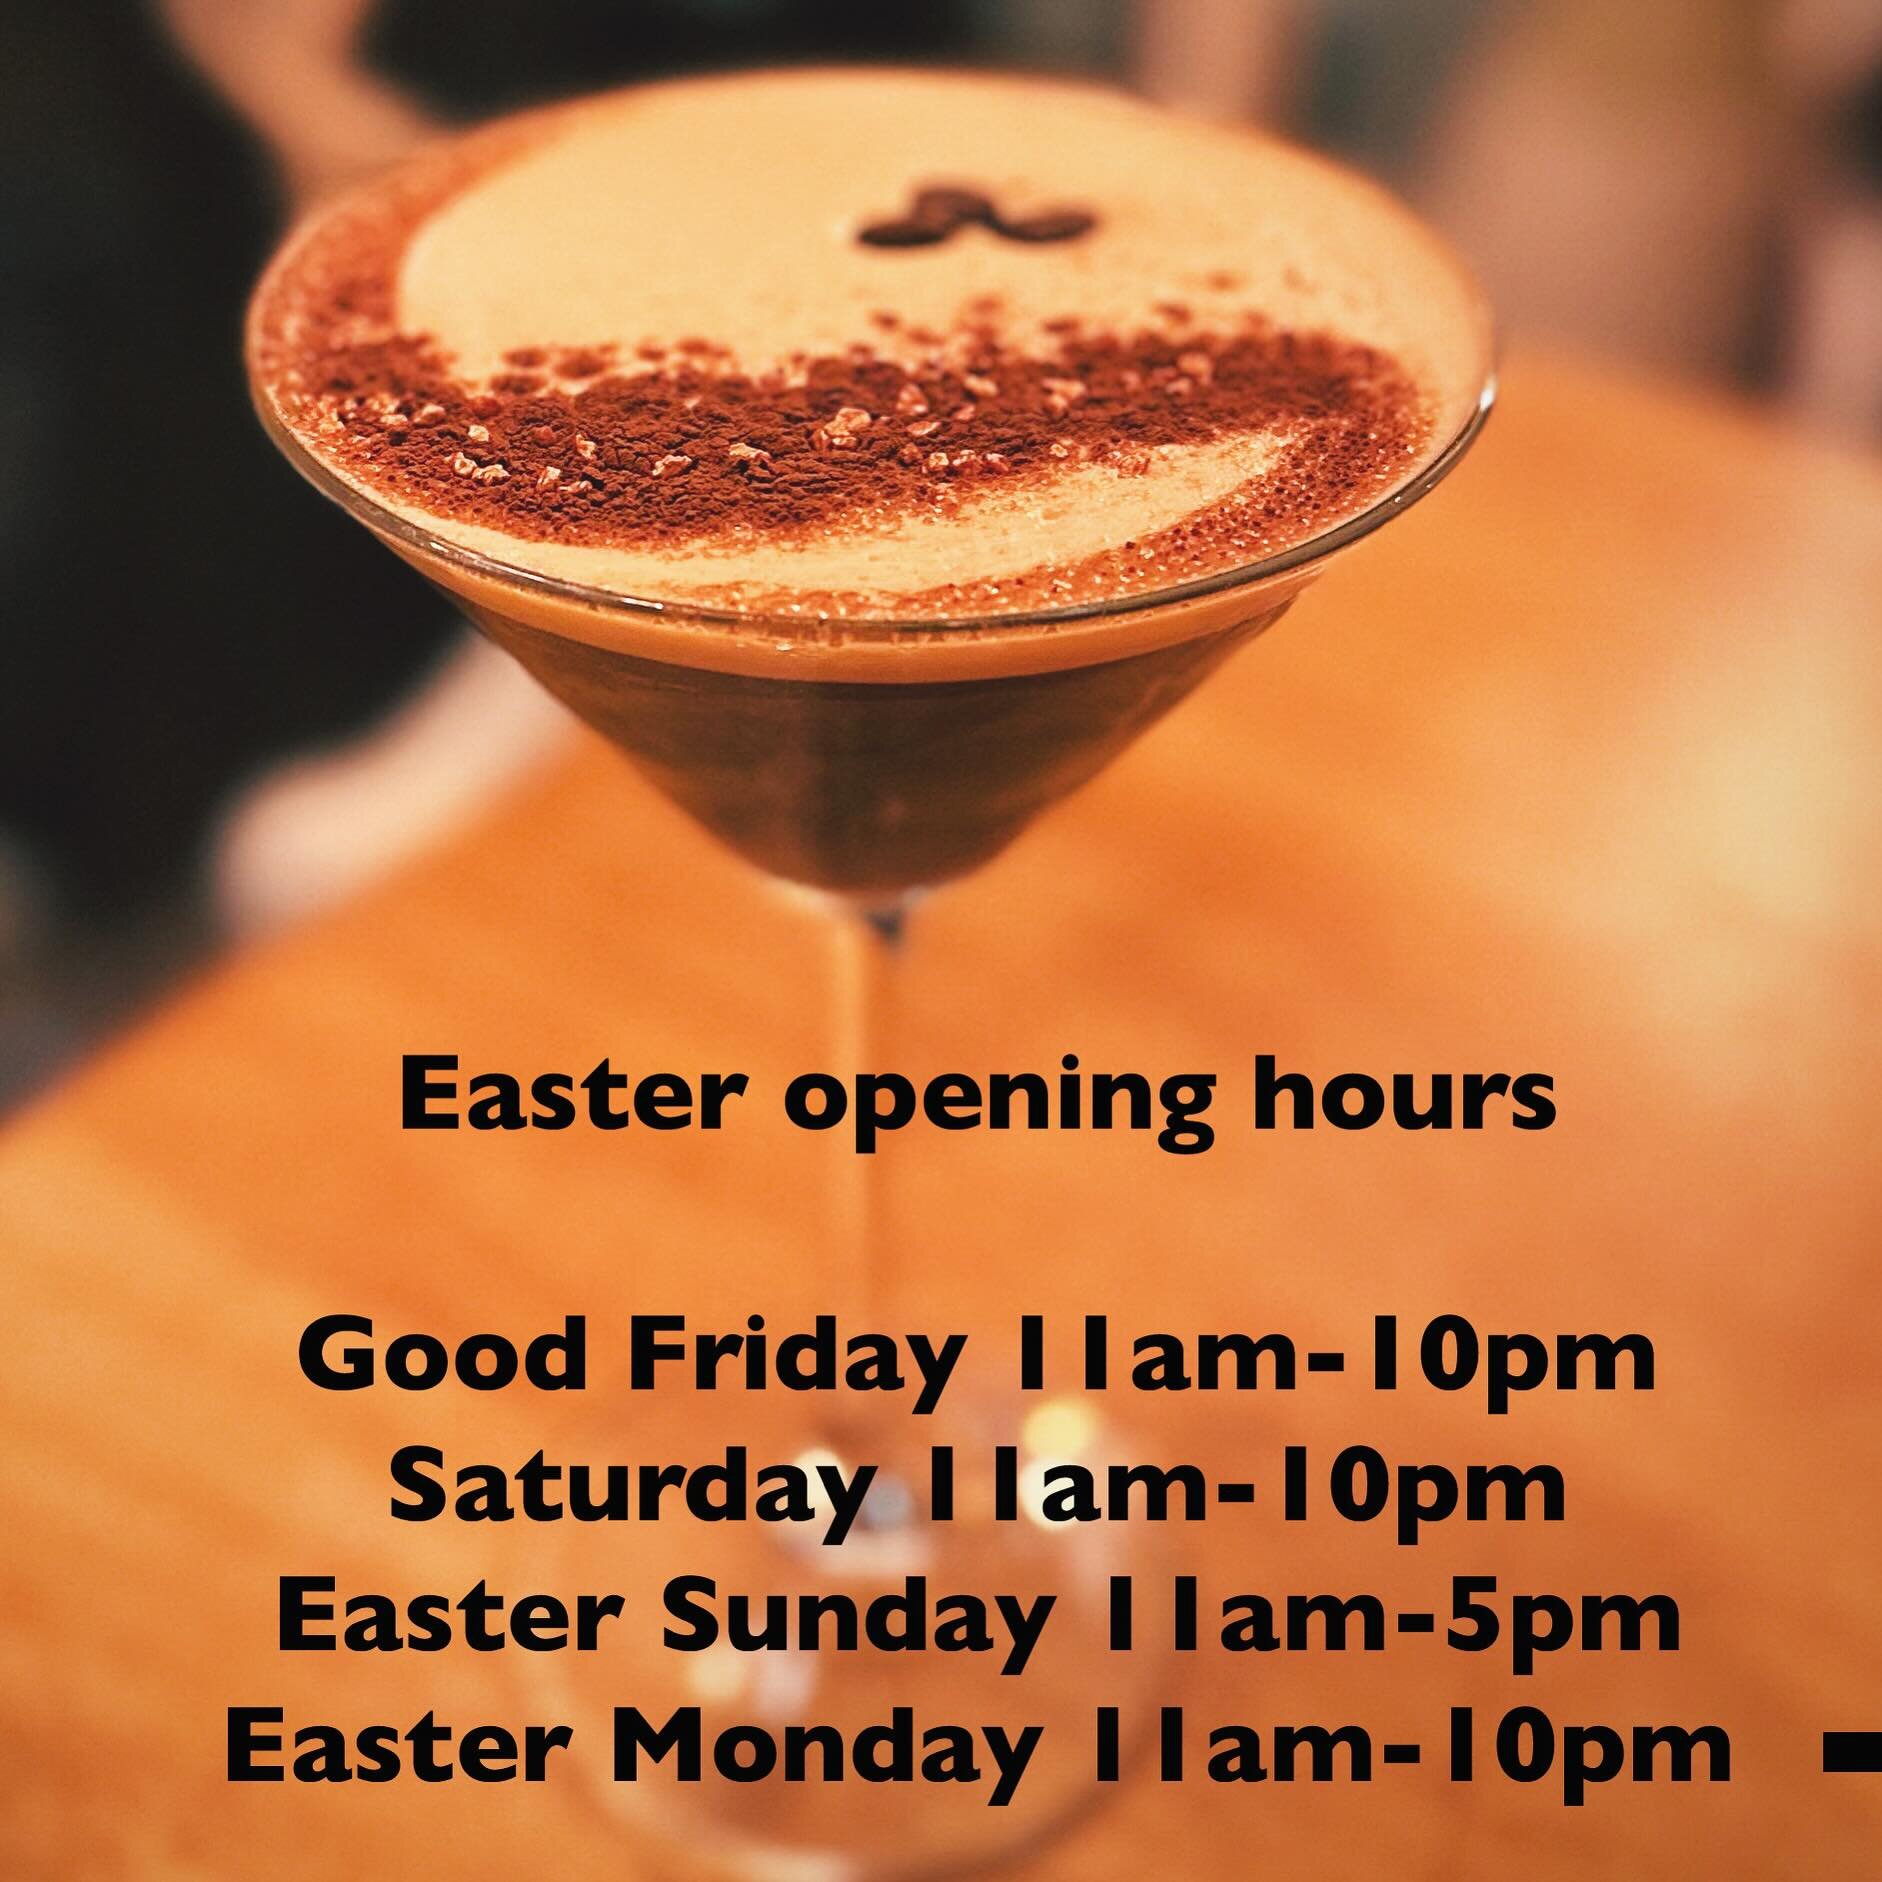 Hello Everyone for Easter and Bank Holiday weekend we will be open as usual. 
To book your table phone 📞 01273671266, PM or book on our website www.sisignorecaferestaurant.com

We look forward to seeing you 🤗🕊️🍫🍸💛

Easter opening hours 🐣🏵️

?